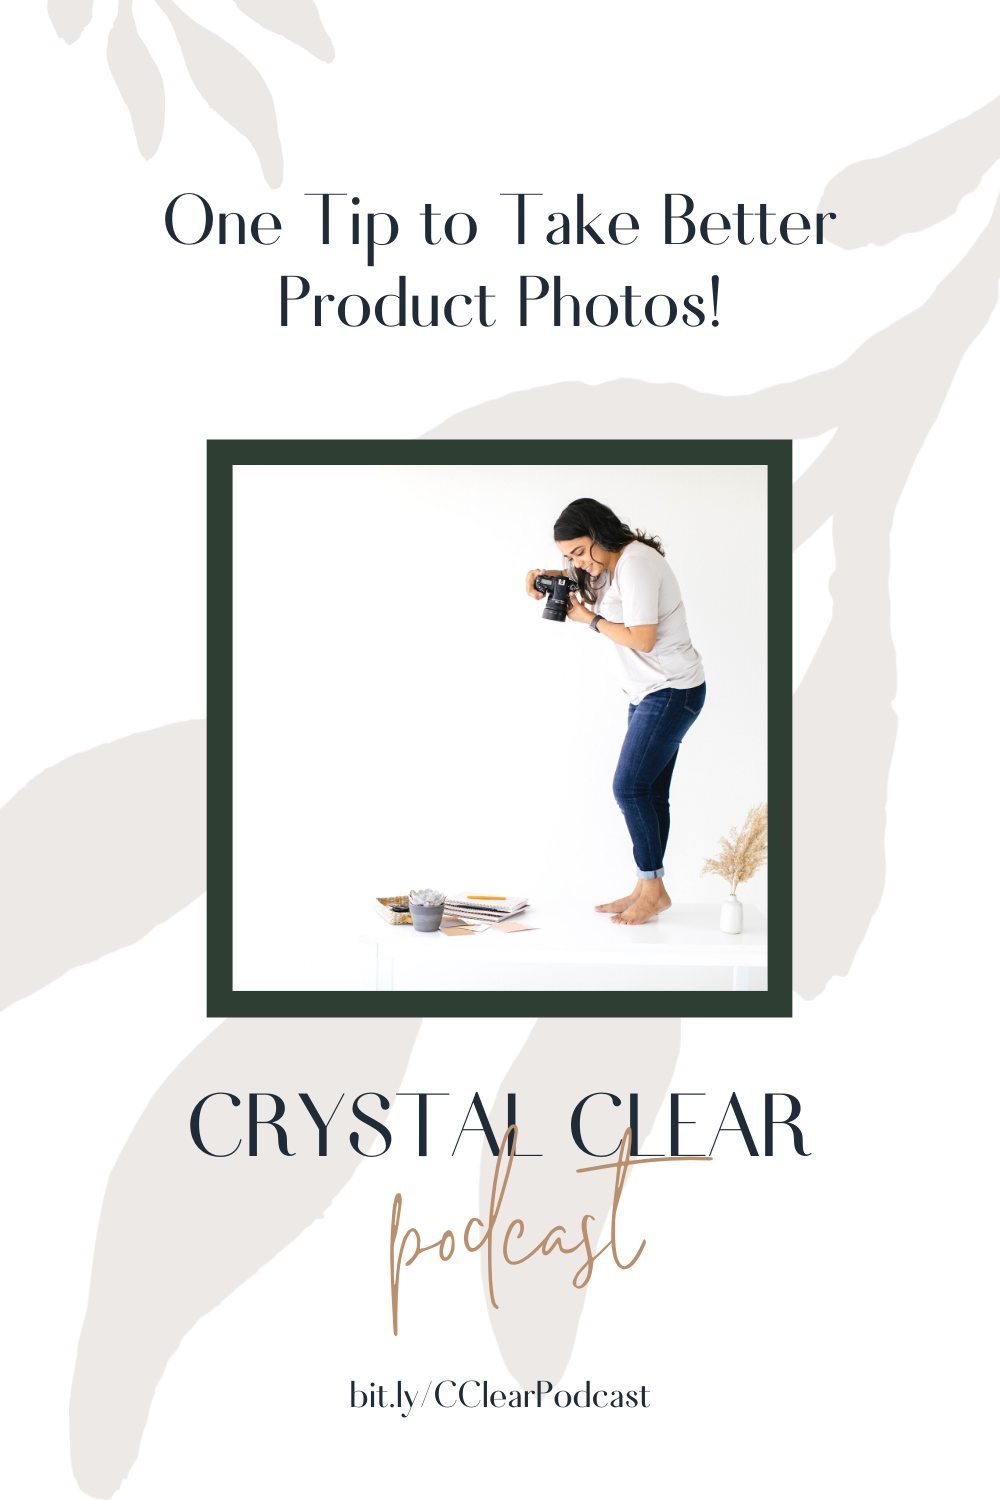 One Tip to Take Better Product Photos!